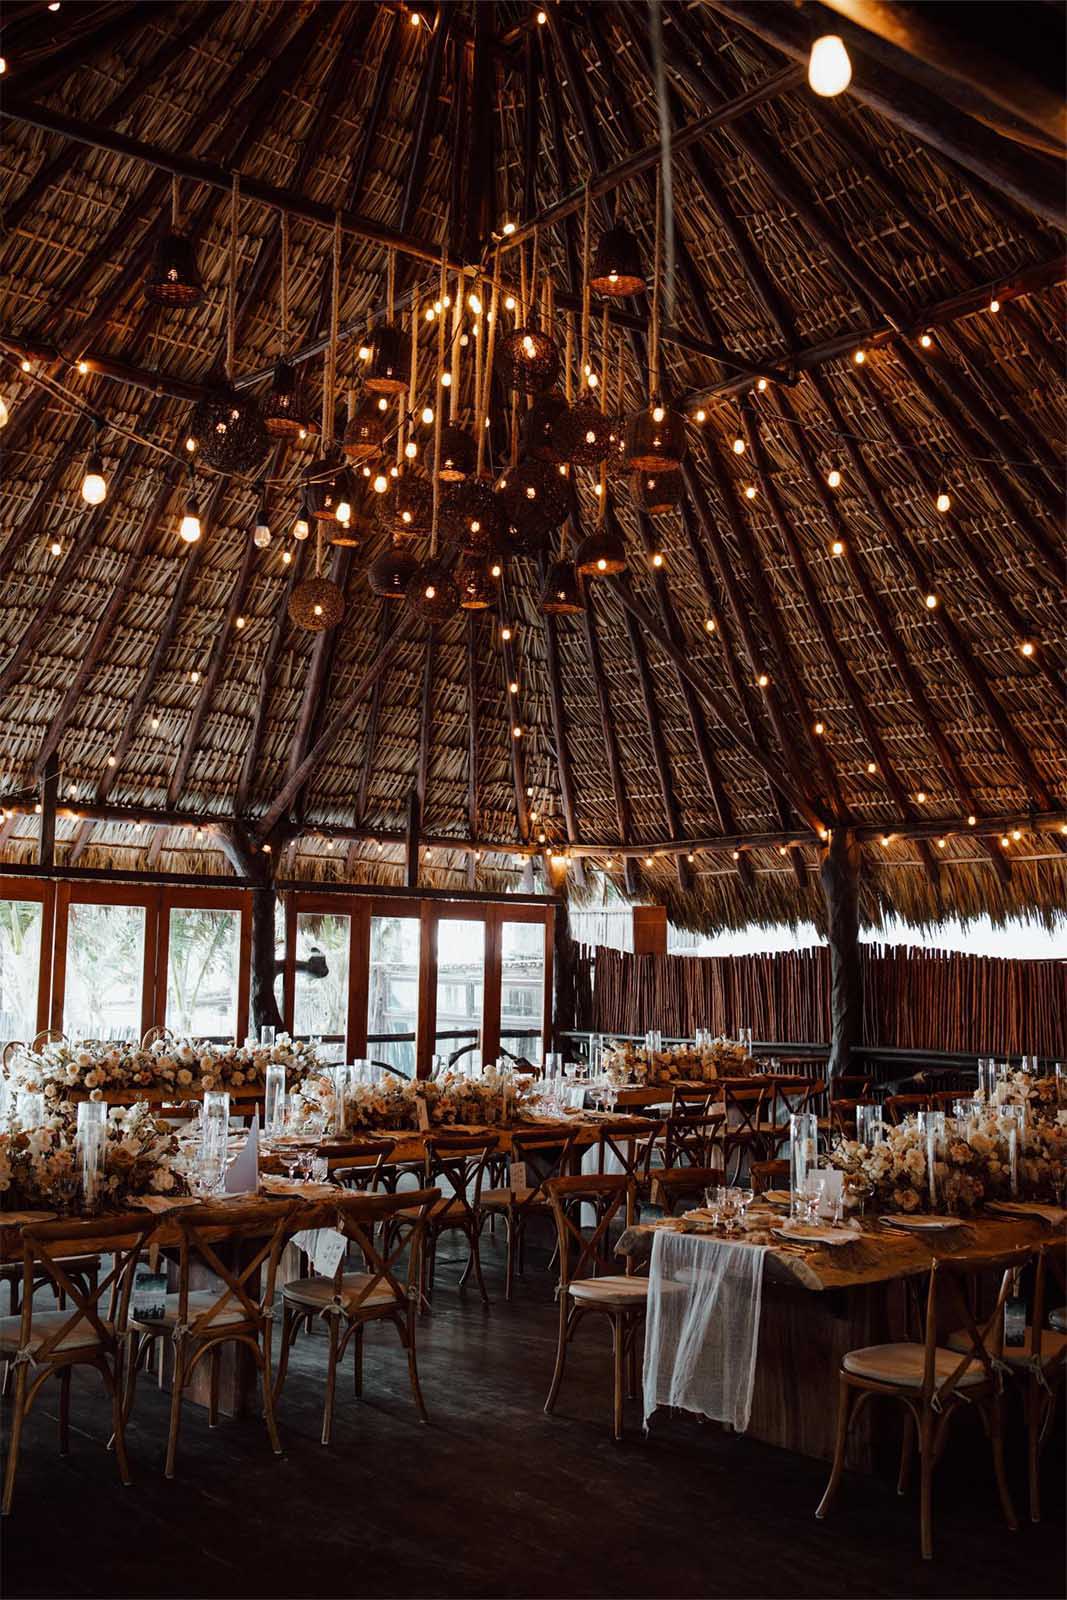 The reception is held in a stunning setting, with rustic wooden tables adorned with simple yet elegant floral arrangements